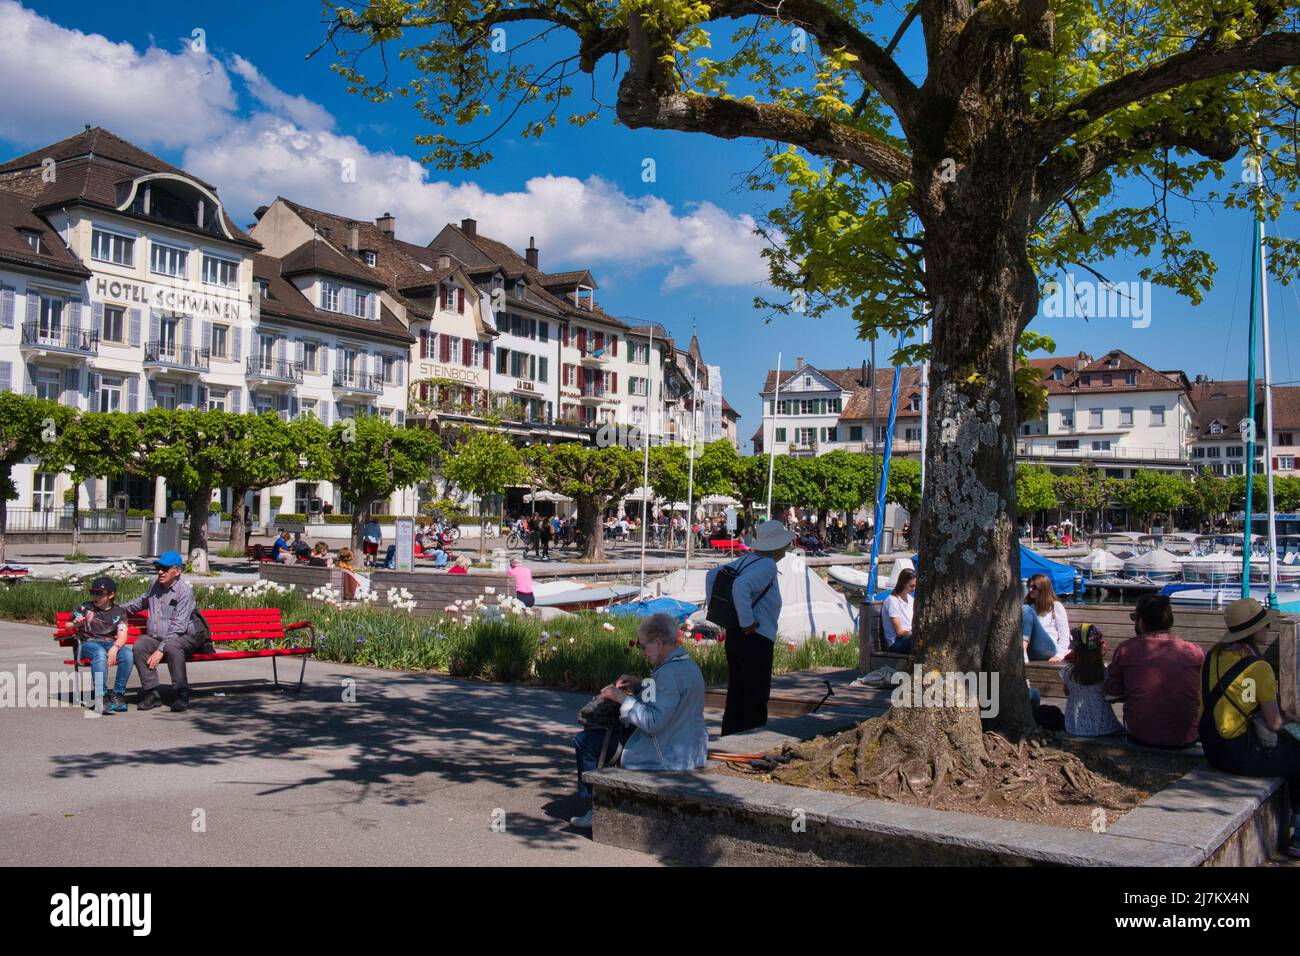 SHORELINE TO LAKE ZURICH AT RAPPERSWIL WITH SHOPS, RESTAURANTS AND DWELLINGS IN THE BACKGROUND AND THE HARBOUR WITH PROMENADE IN THE FOREGROUND Stock Photo